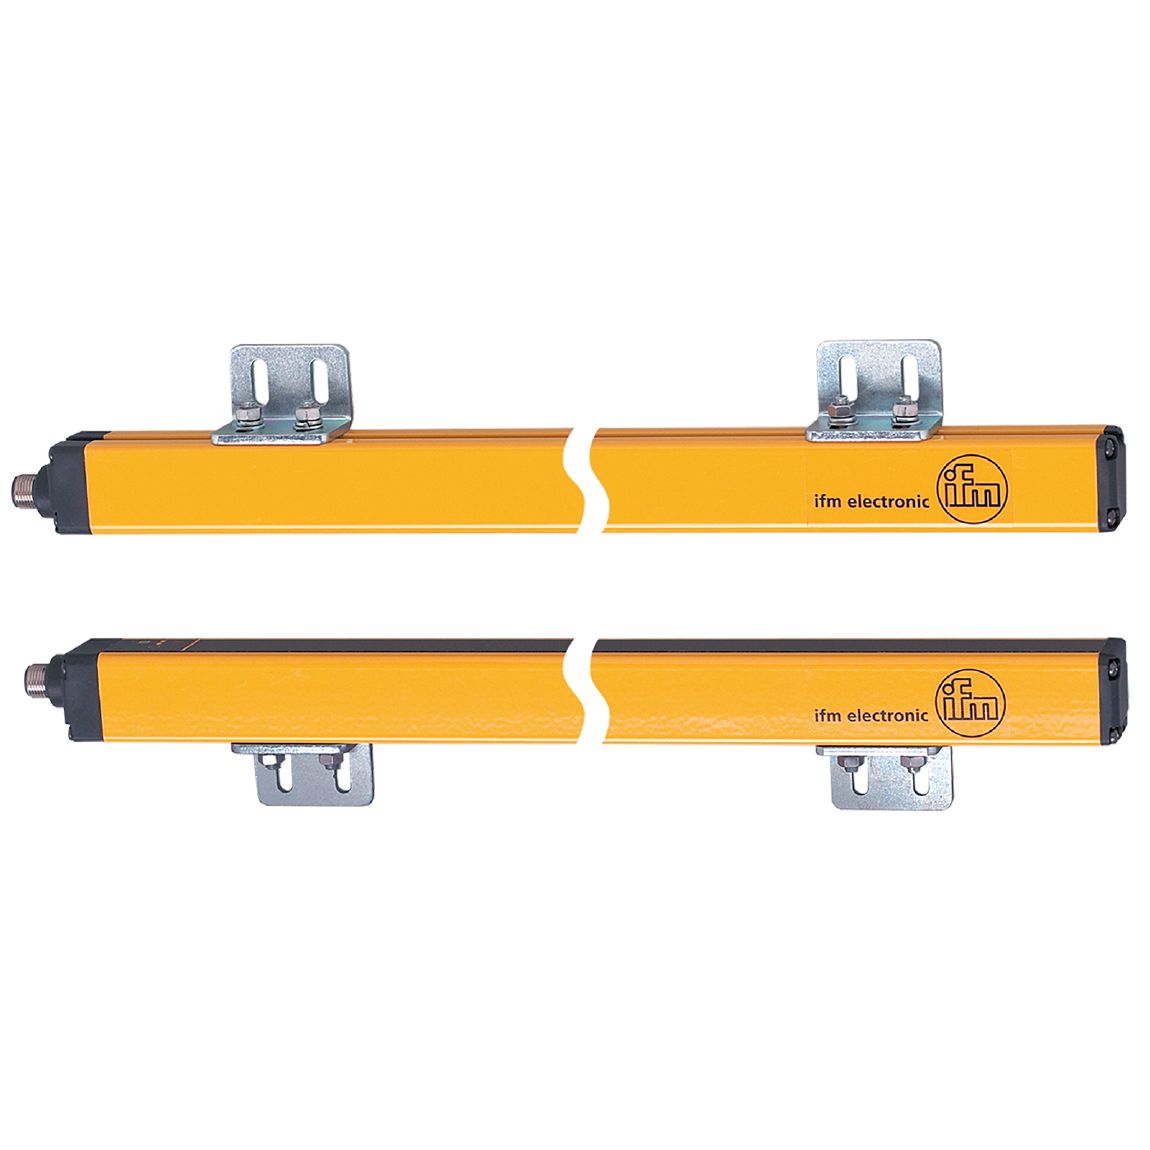 OY034S - Safety light curtain - ifm